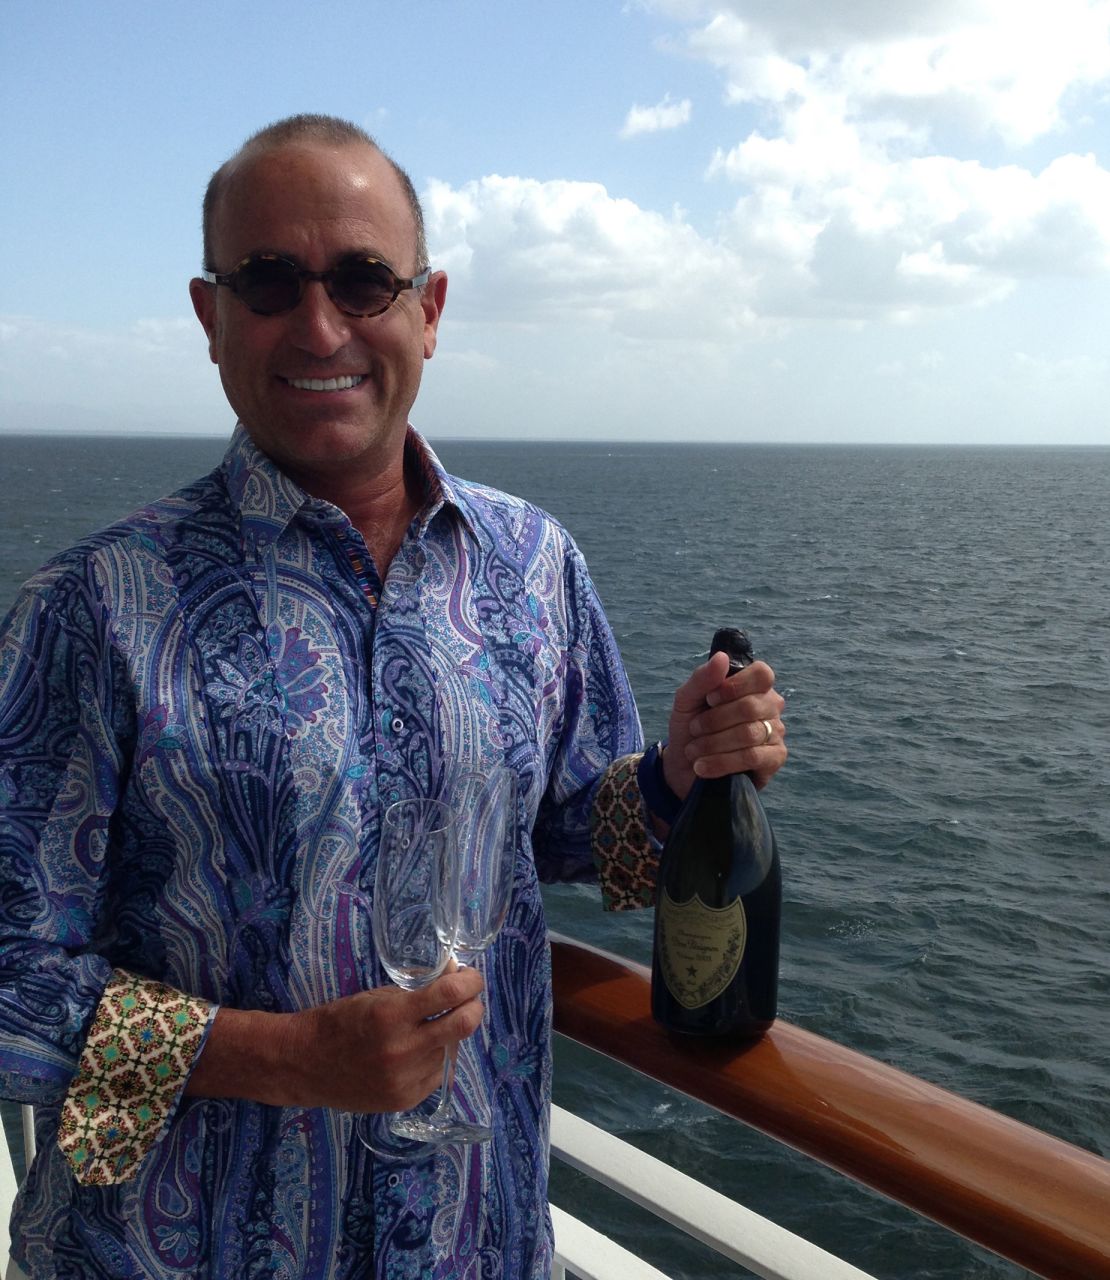 Antonucci says "there's a lot of drinking" and "a lot of partying" on board The World.